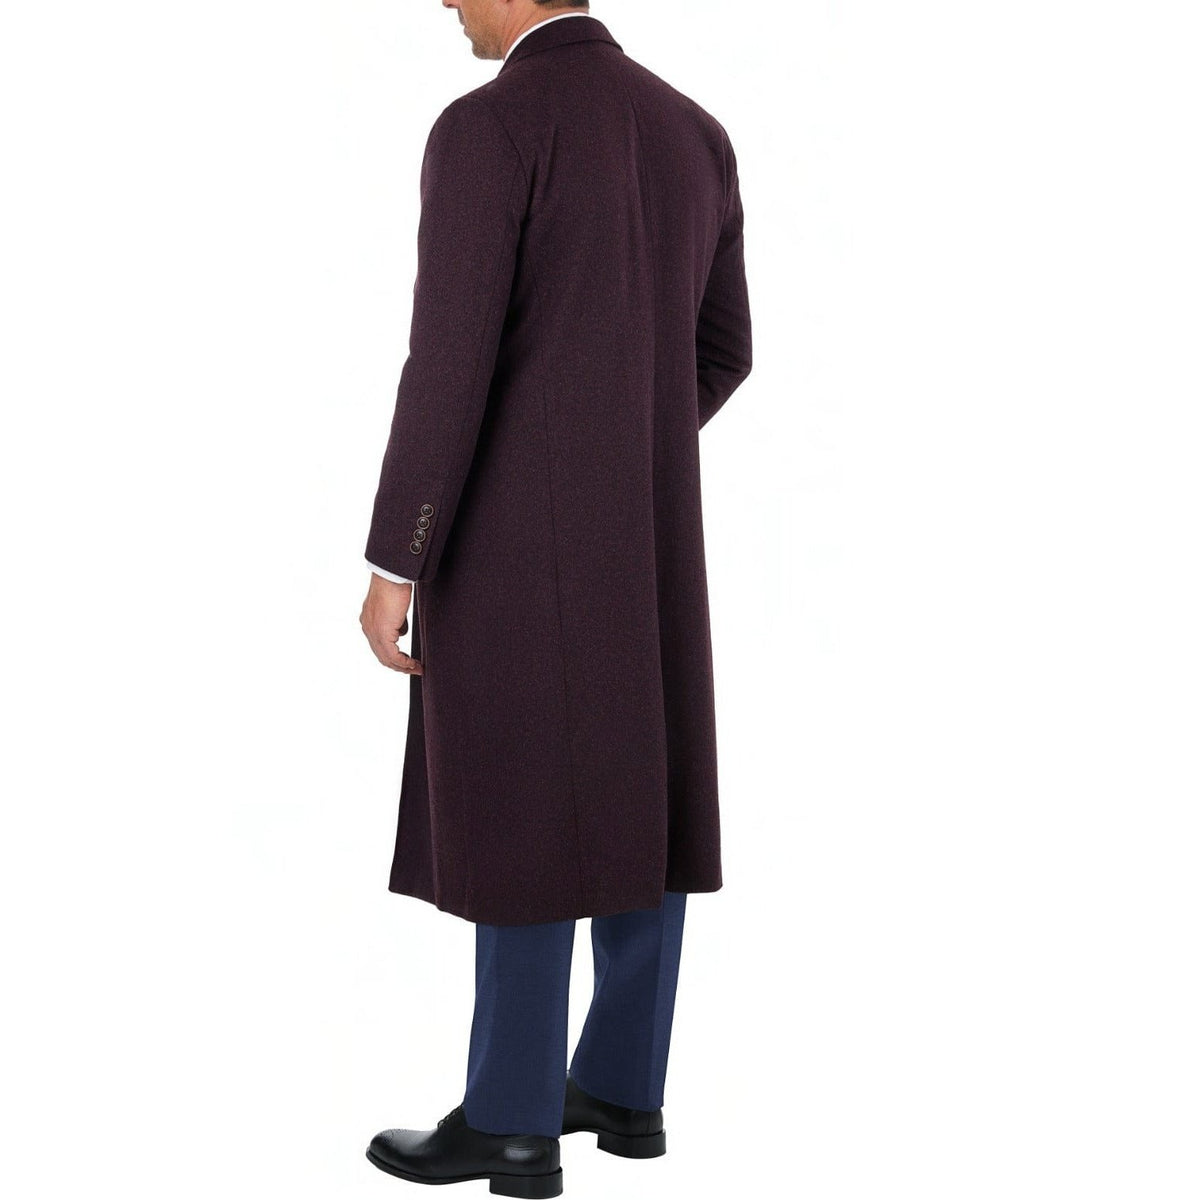 Label E OUTERWEAR Mens Regular Fit Solid Burgundy Full Length Wool Cashmere Overcoat Top Coat